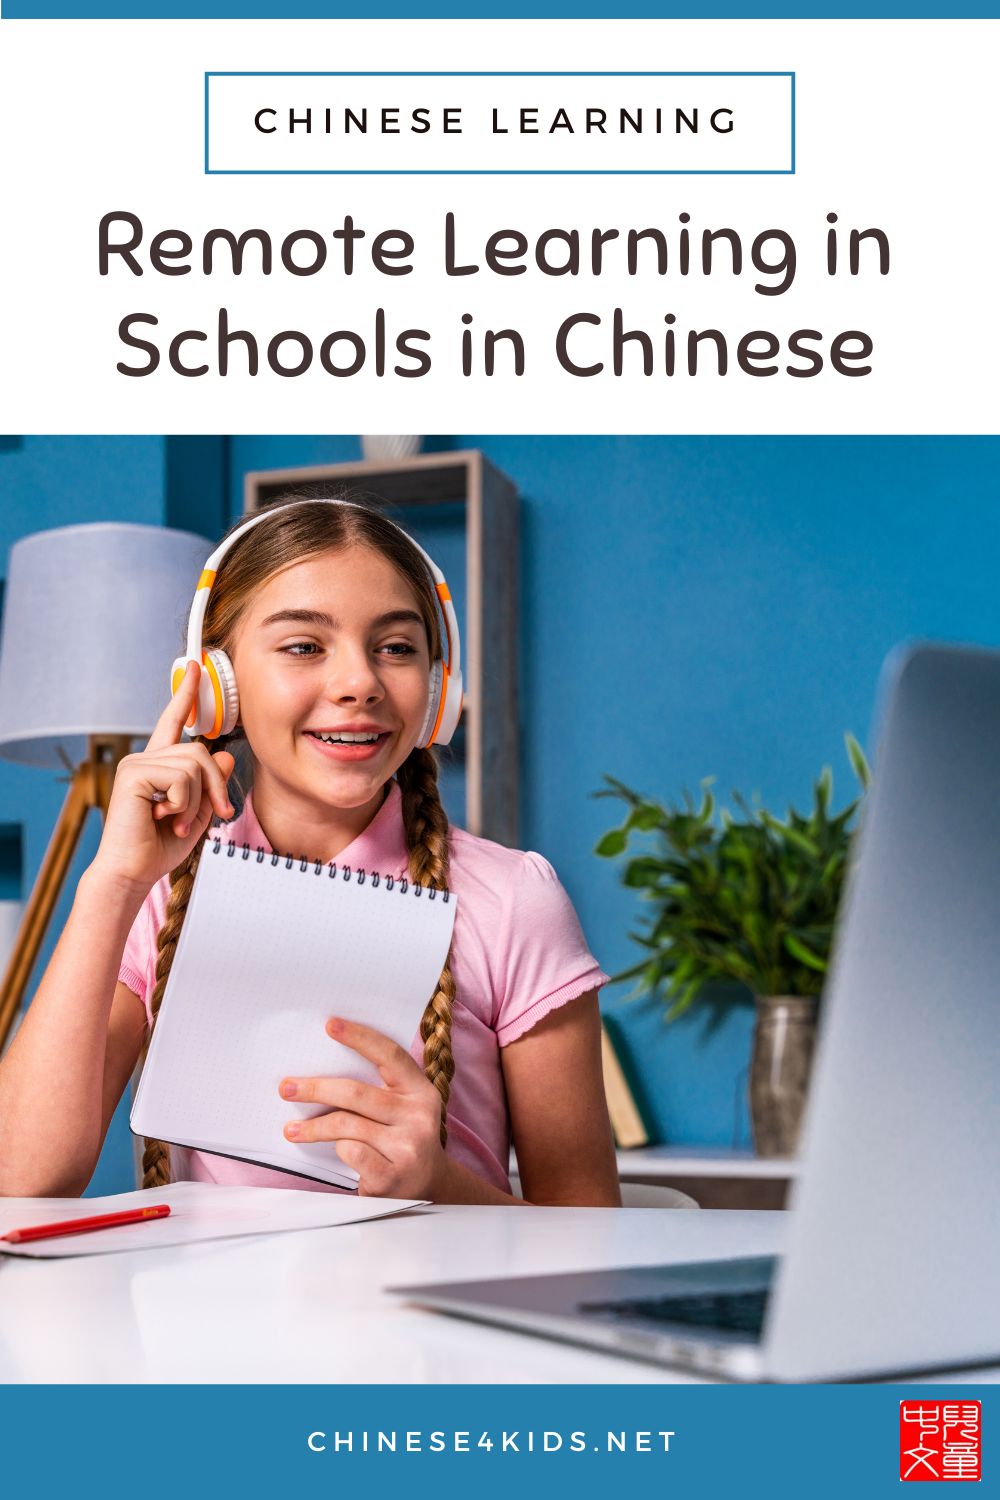 remote learning in school in Chinese